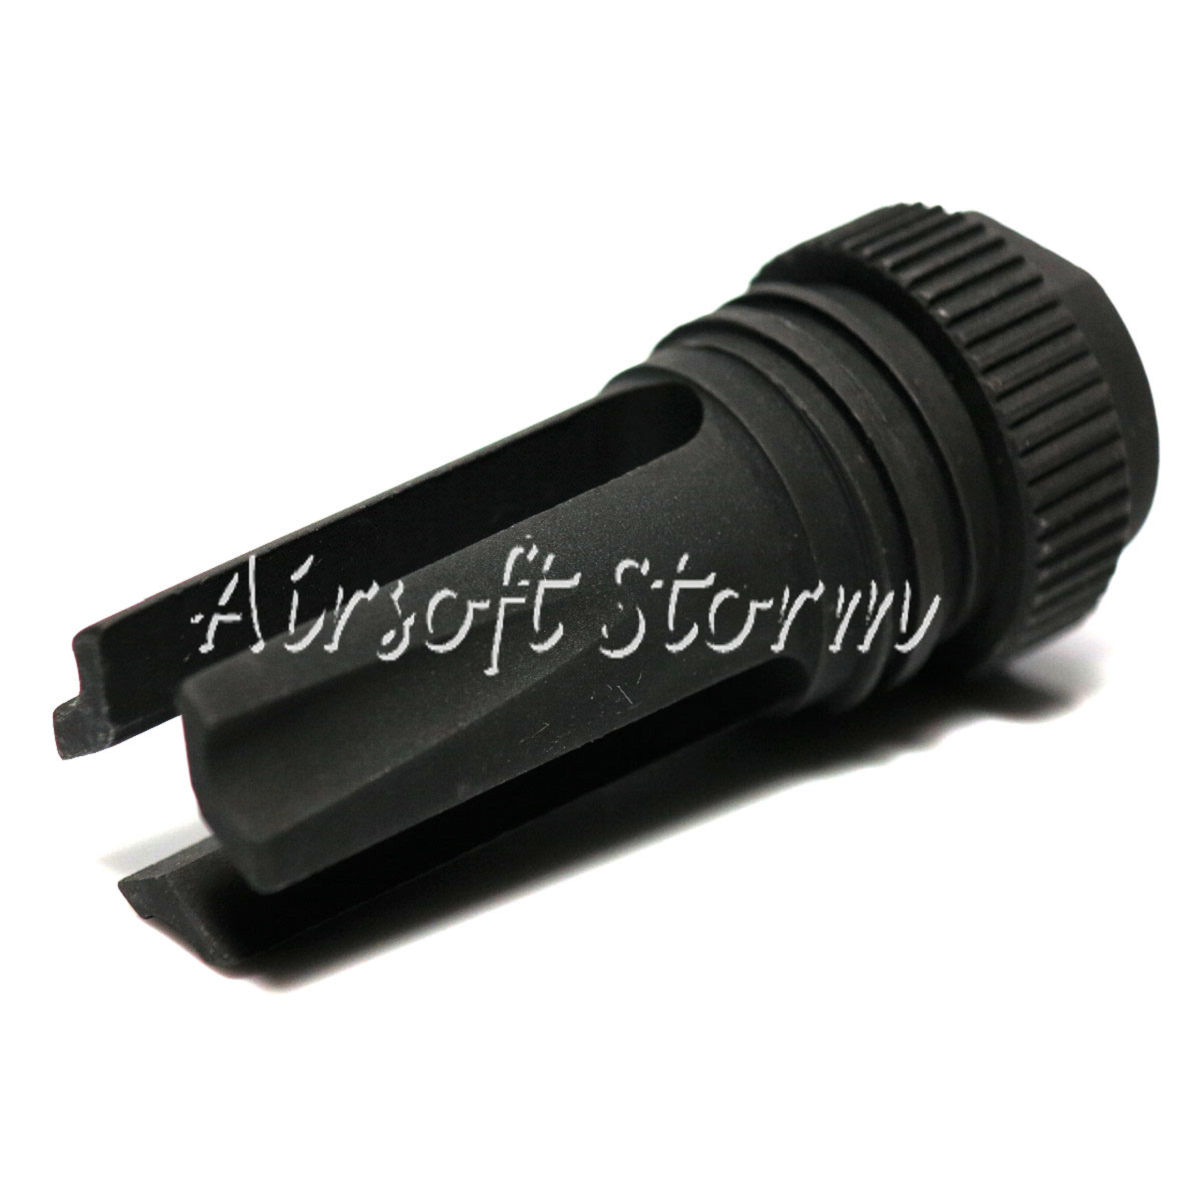 Shooting Gear Army Force AAC Type Steel Flash Hider 14mm CCW Black